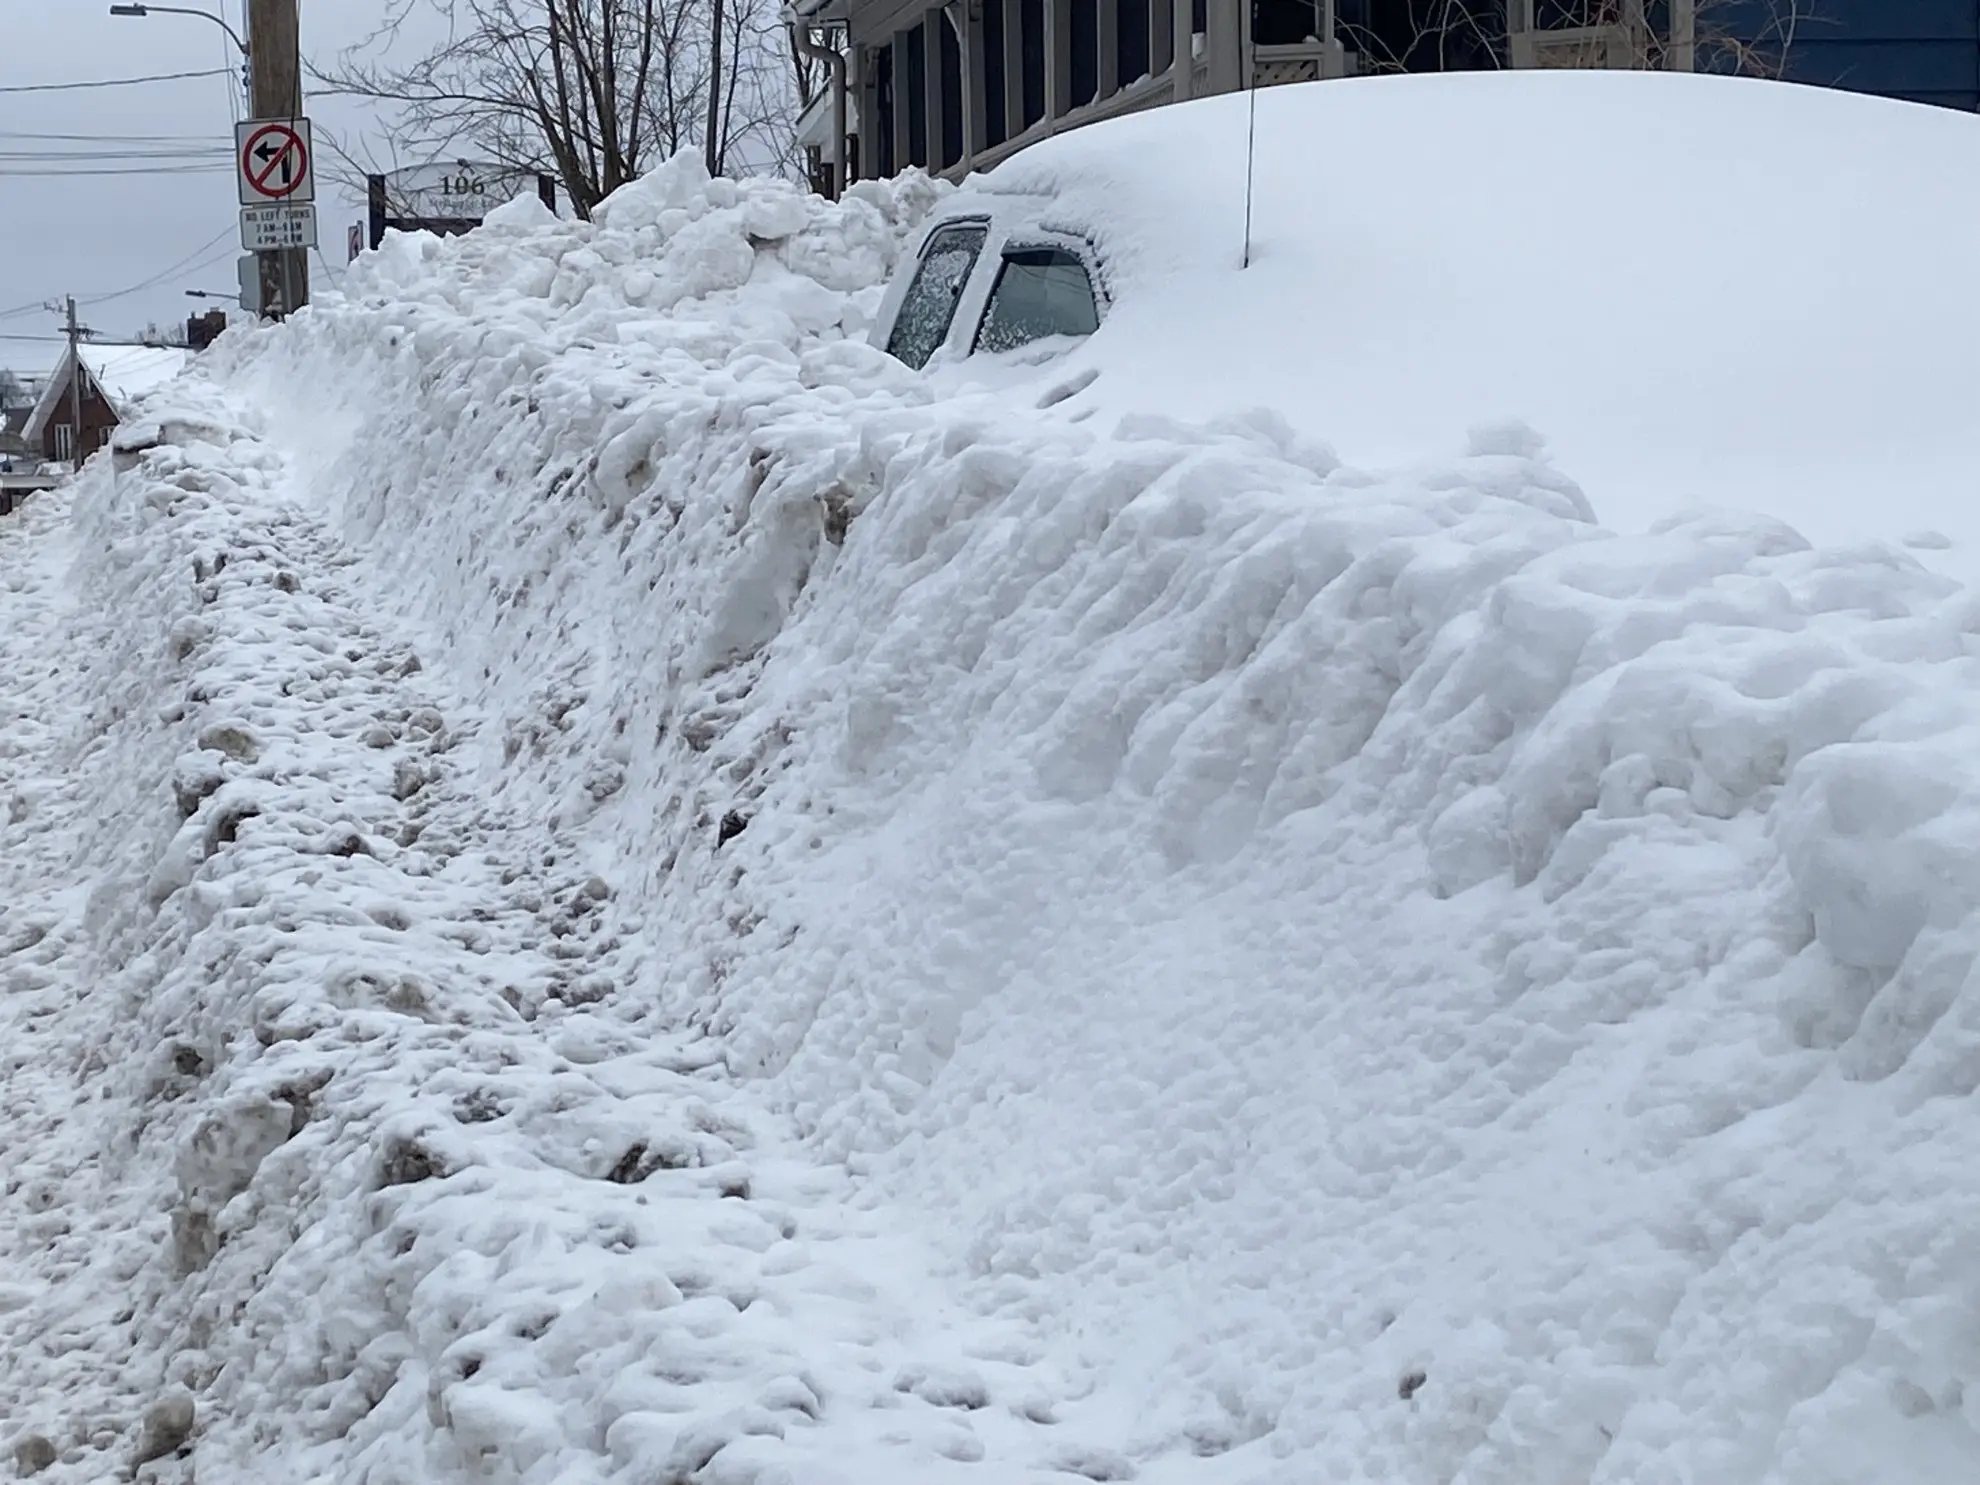 Mega-banks: Daunting cleanup after 100 cm of snow walloped the East Coast